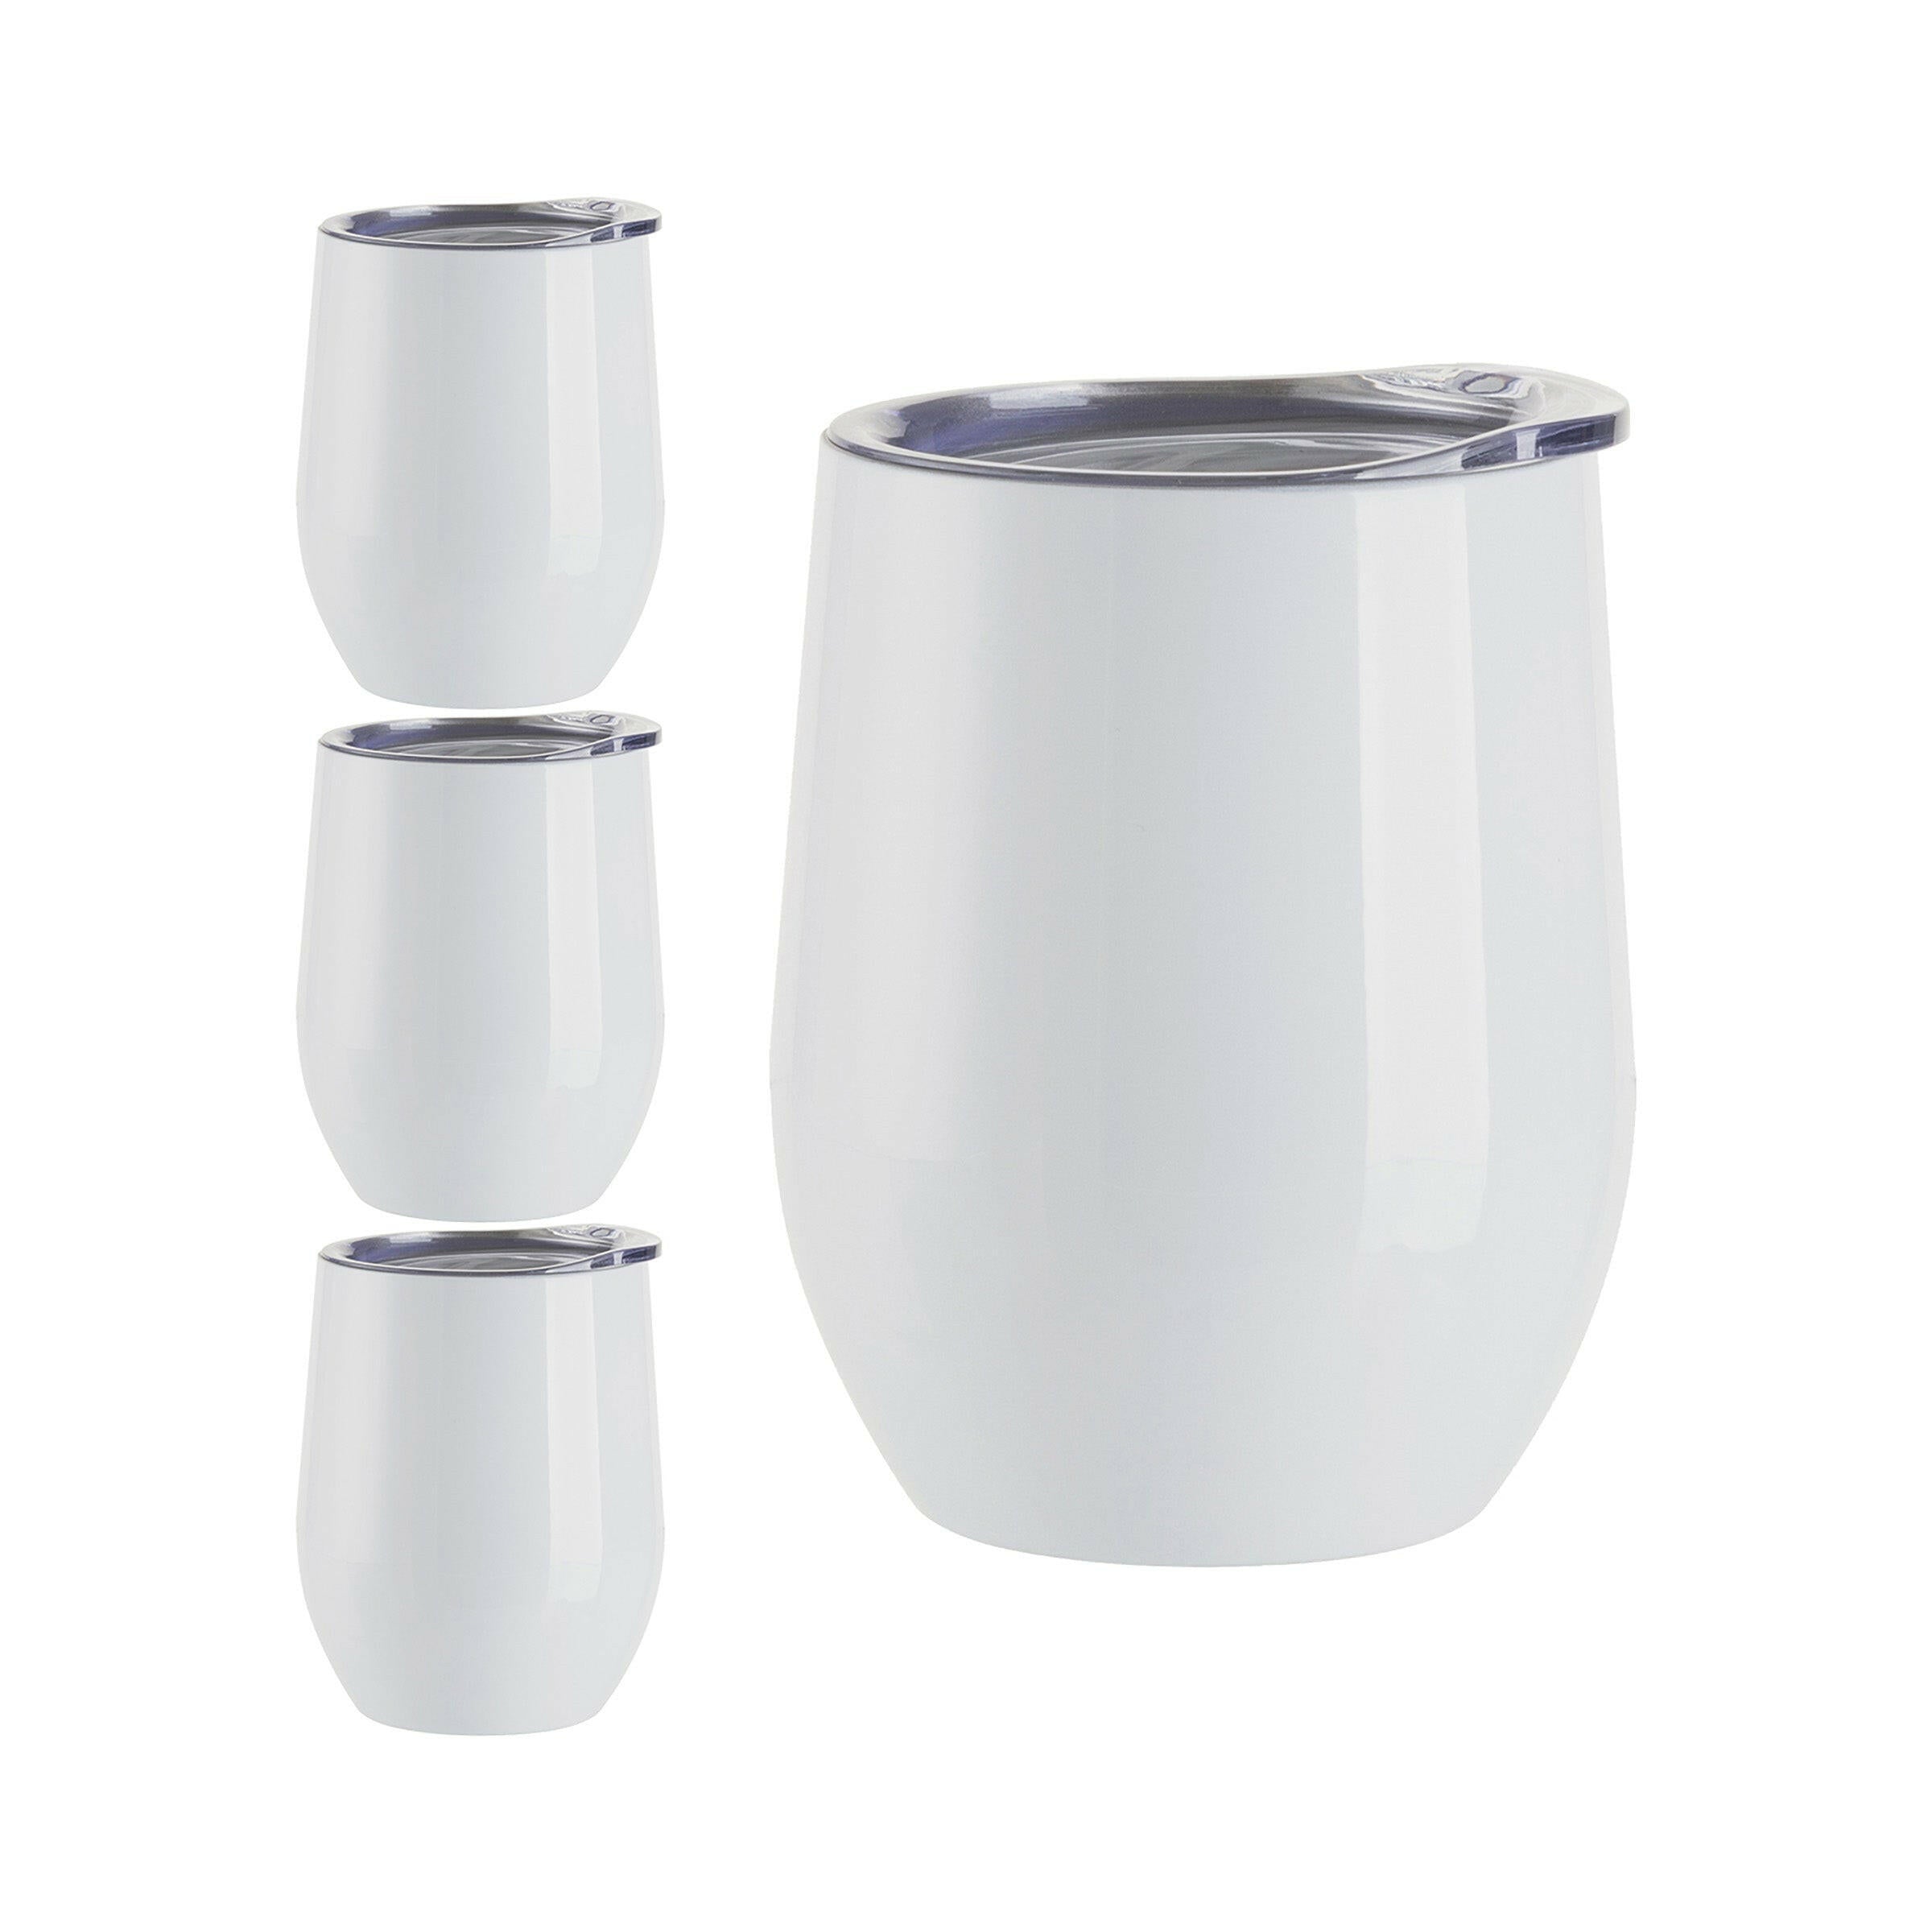 Stainless Steel Sublimation Wine Tumbler - 6 Pack.